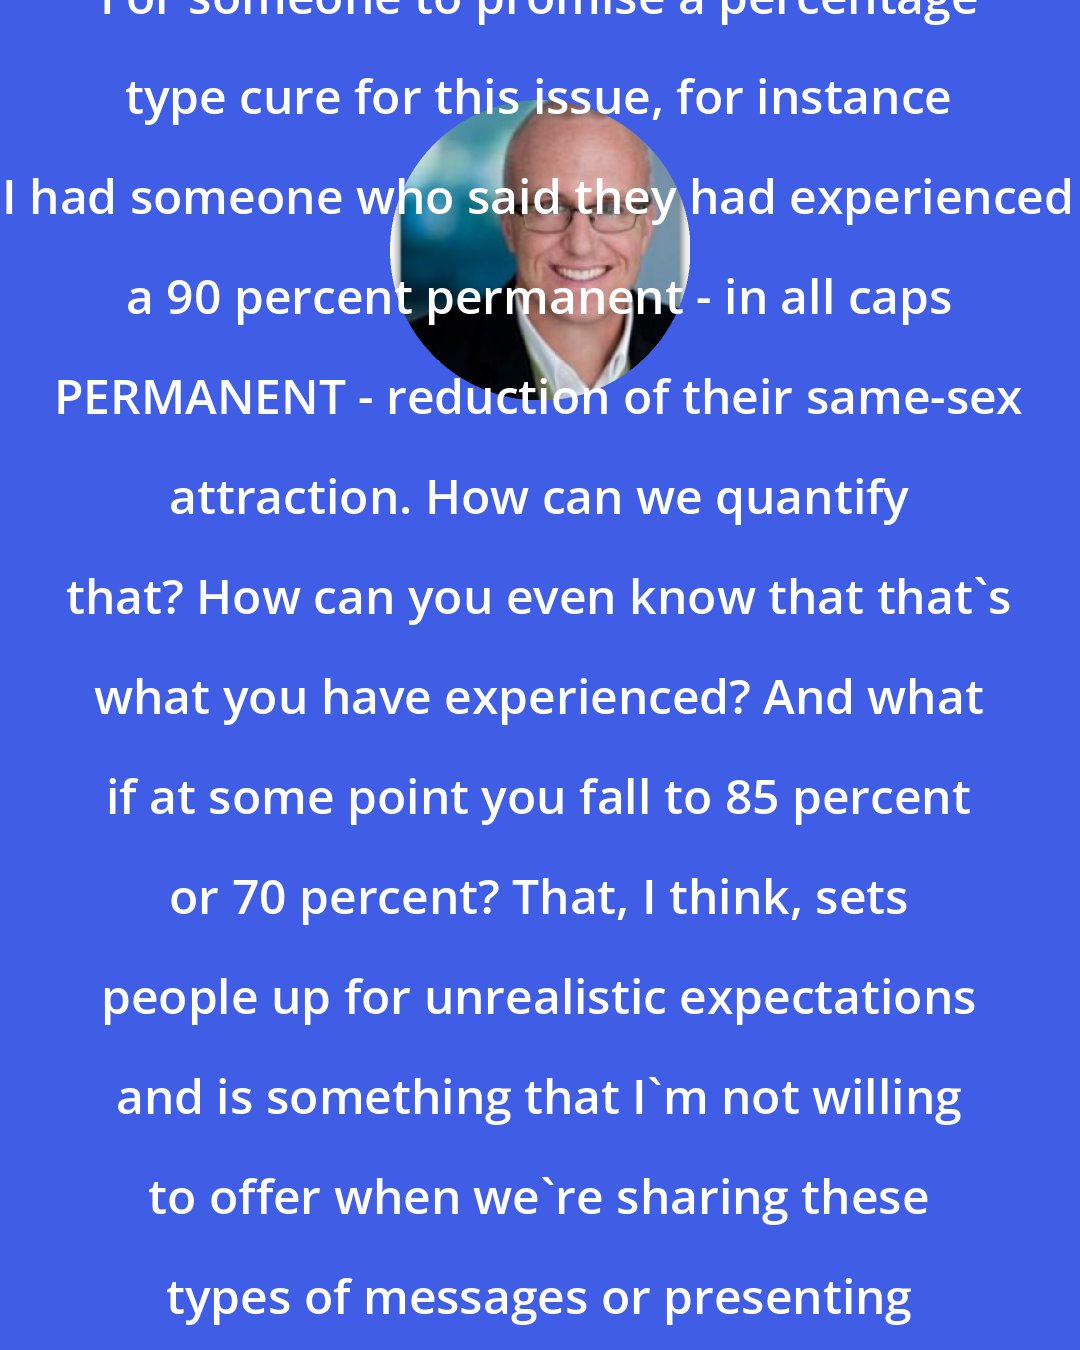 Alan Chambers: For someone to promise a percentage type cure for this issue, for instance I had someone who said they had experienced a 90 percent permanent - in all caps PERMANENT - reduction of their same-sex attraction. How can we quantify that? How can you even know that that's what you have experienced? And what if at some point you fall to 85 percent or 70 percent? That, I think, sets people up for unrealistic expectations and is something that I'm not willing to offer when we're sharing these types of messages or presenting what was presented to me.